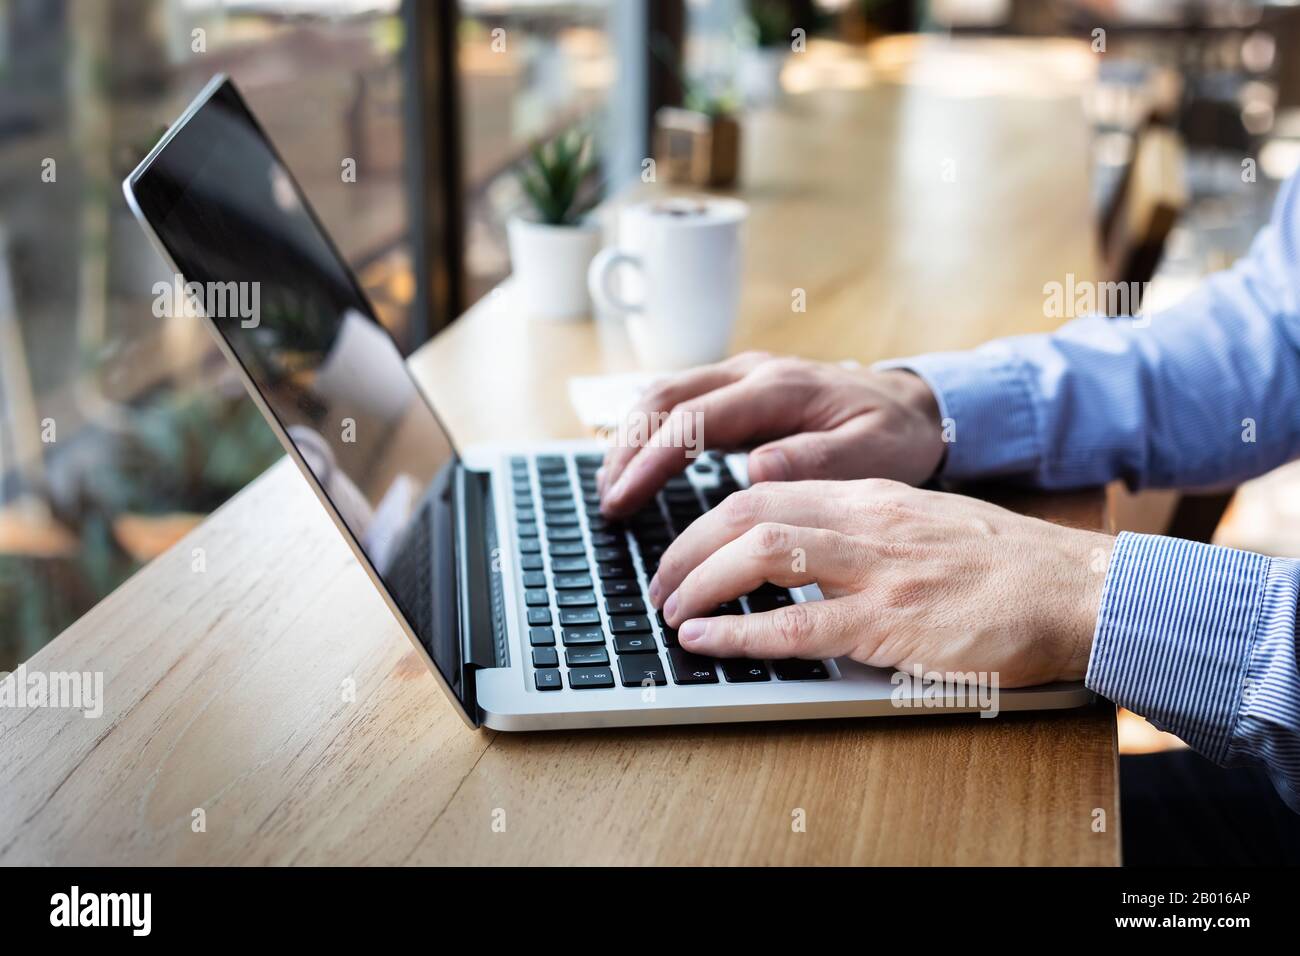 Hands typing on laptop computer keyboard, person writing email or report document in cafe with coffee and wifi internet, casual style, copy-space Stock Photo